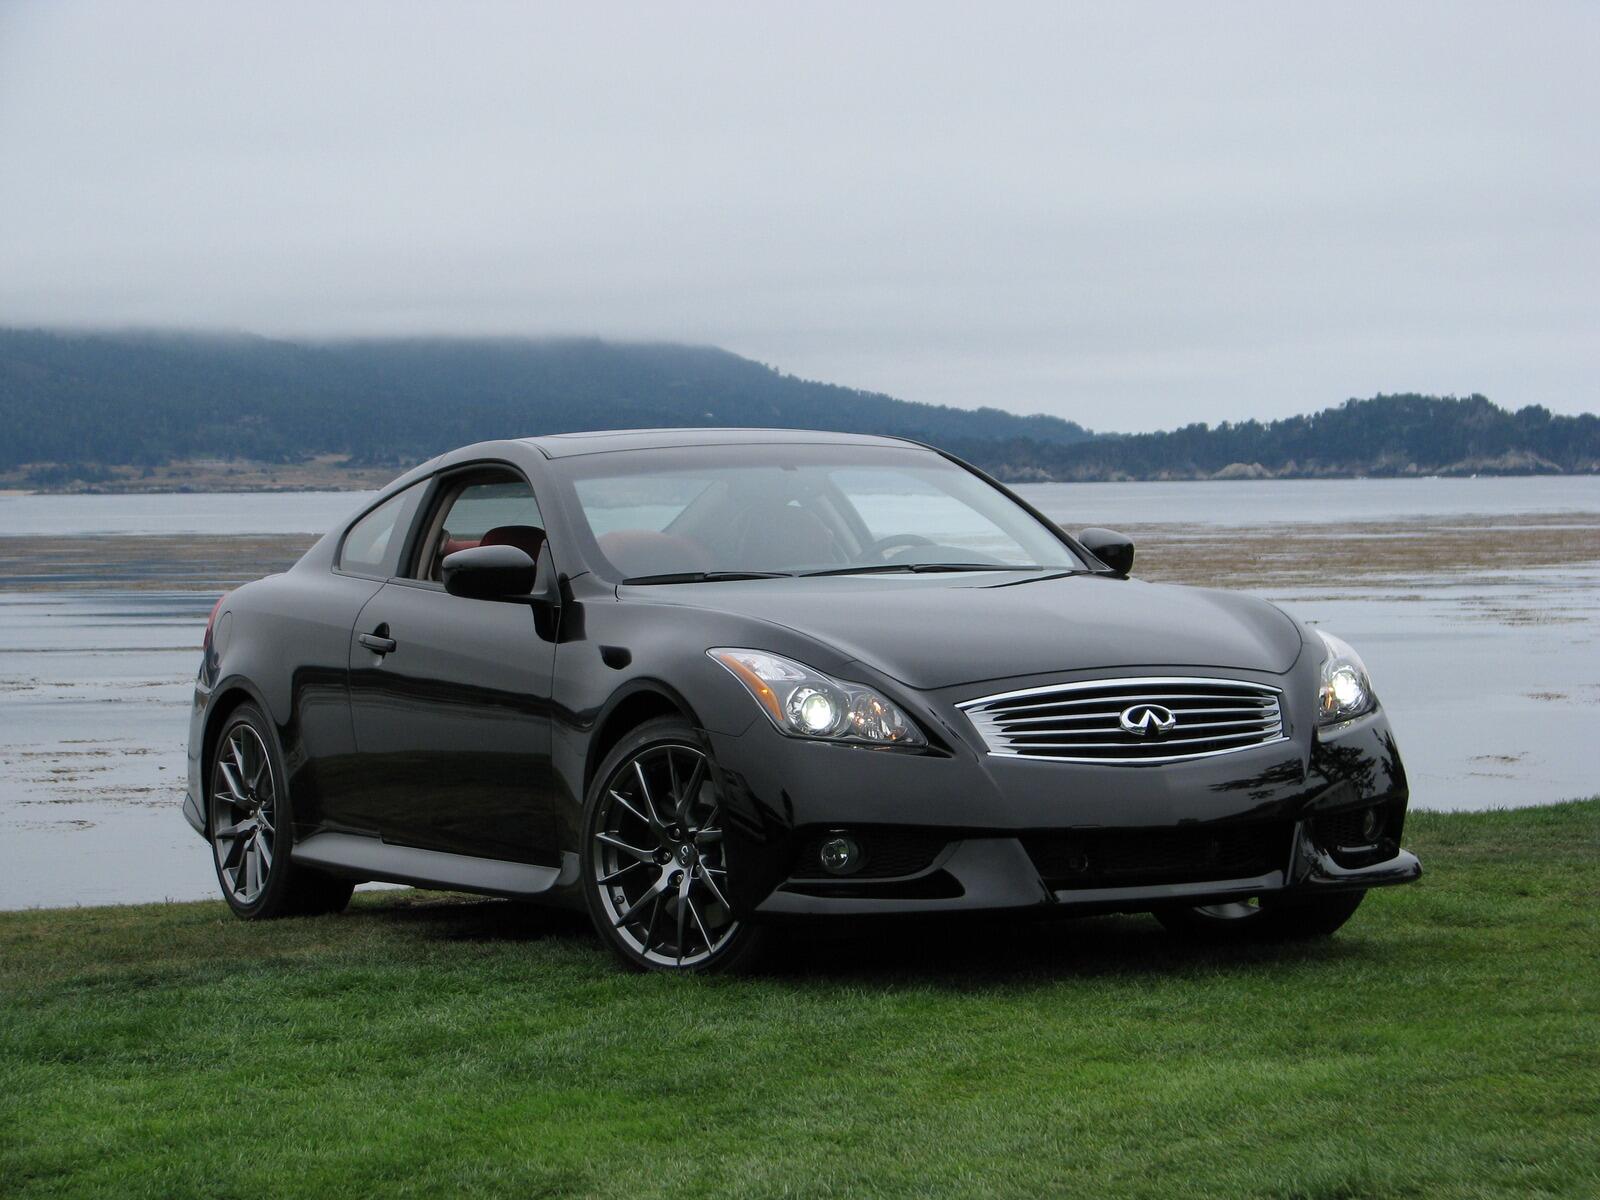 2011 Infiniti IPL G Coupe Priced, On Sale In December